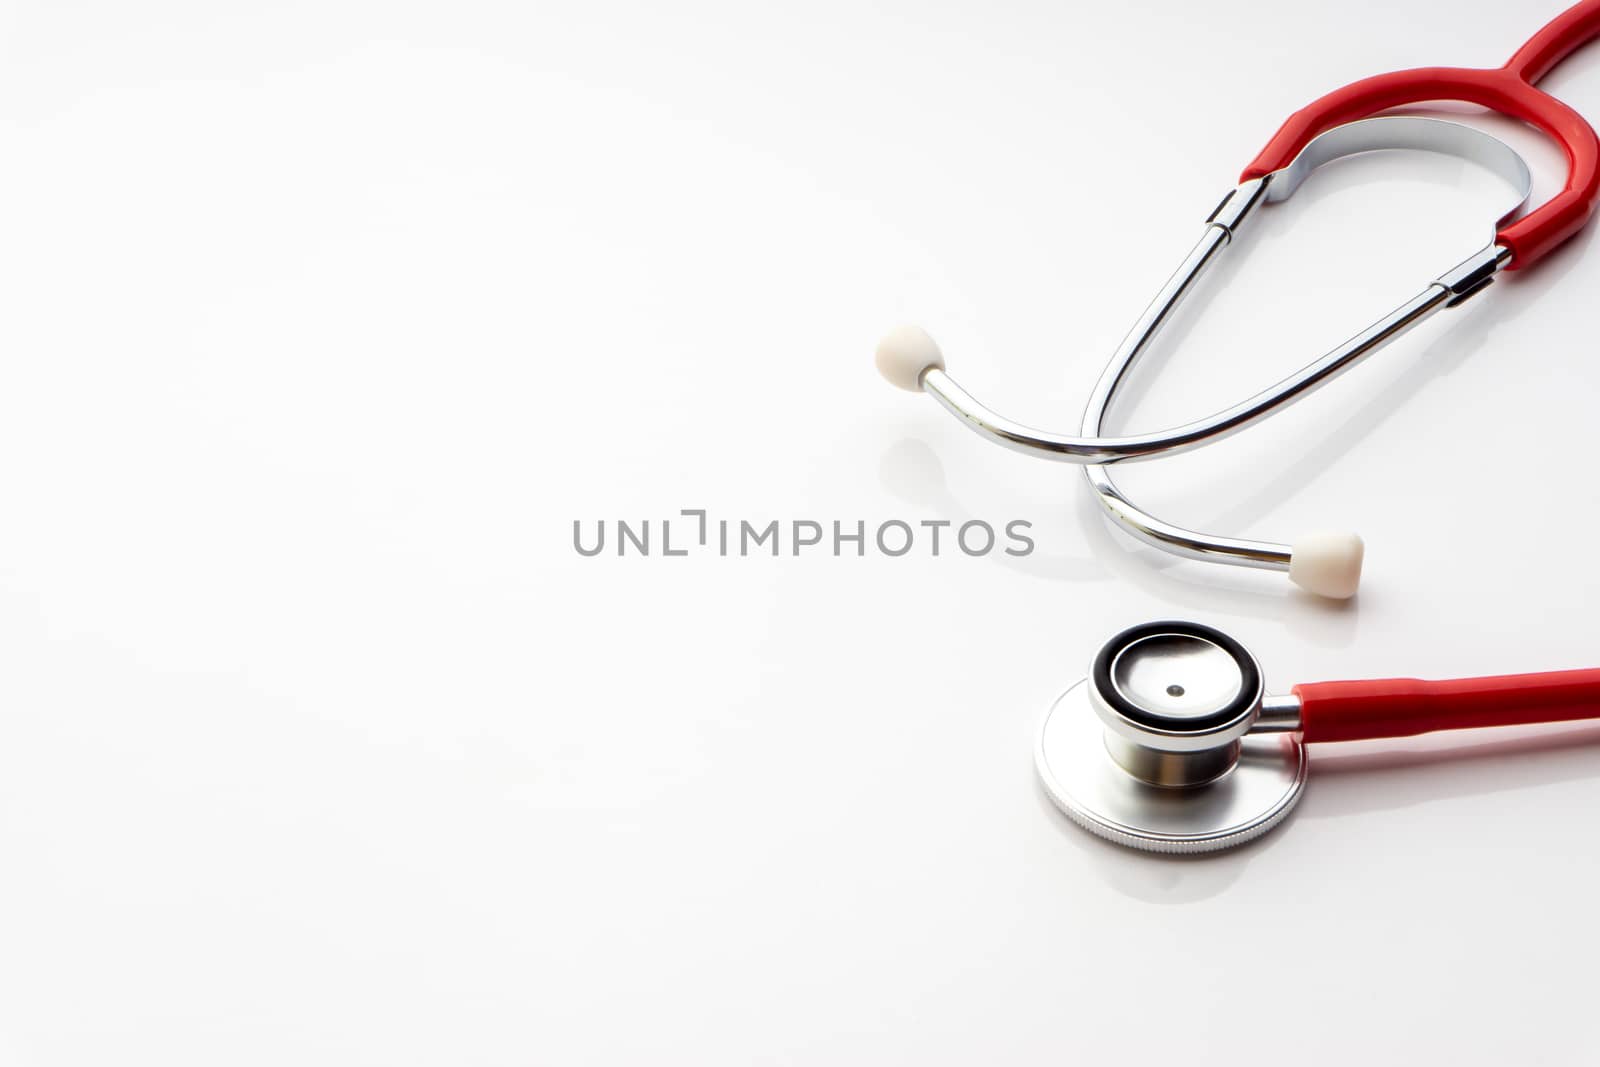 Stethoscope on white background by silverwings